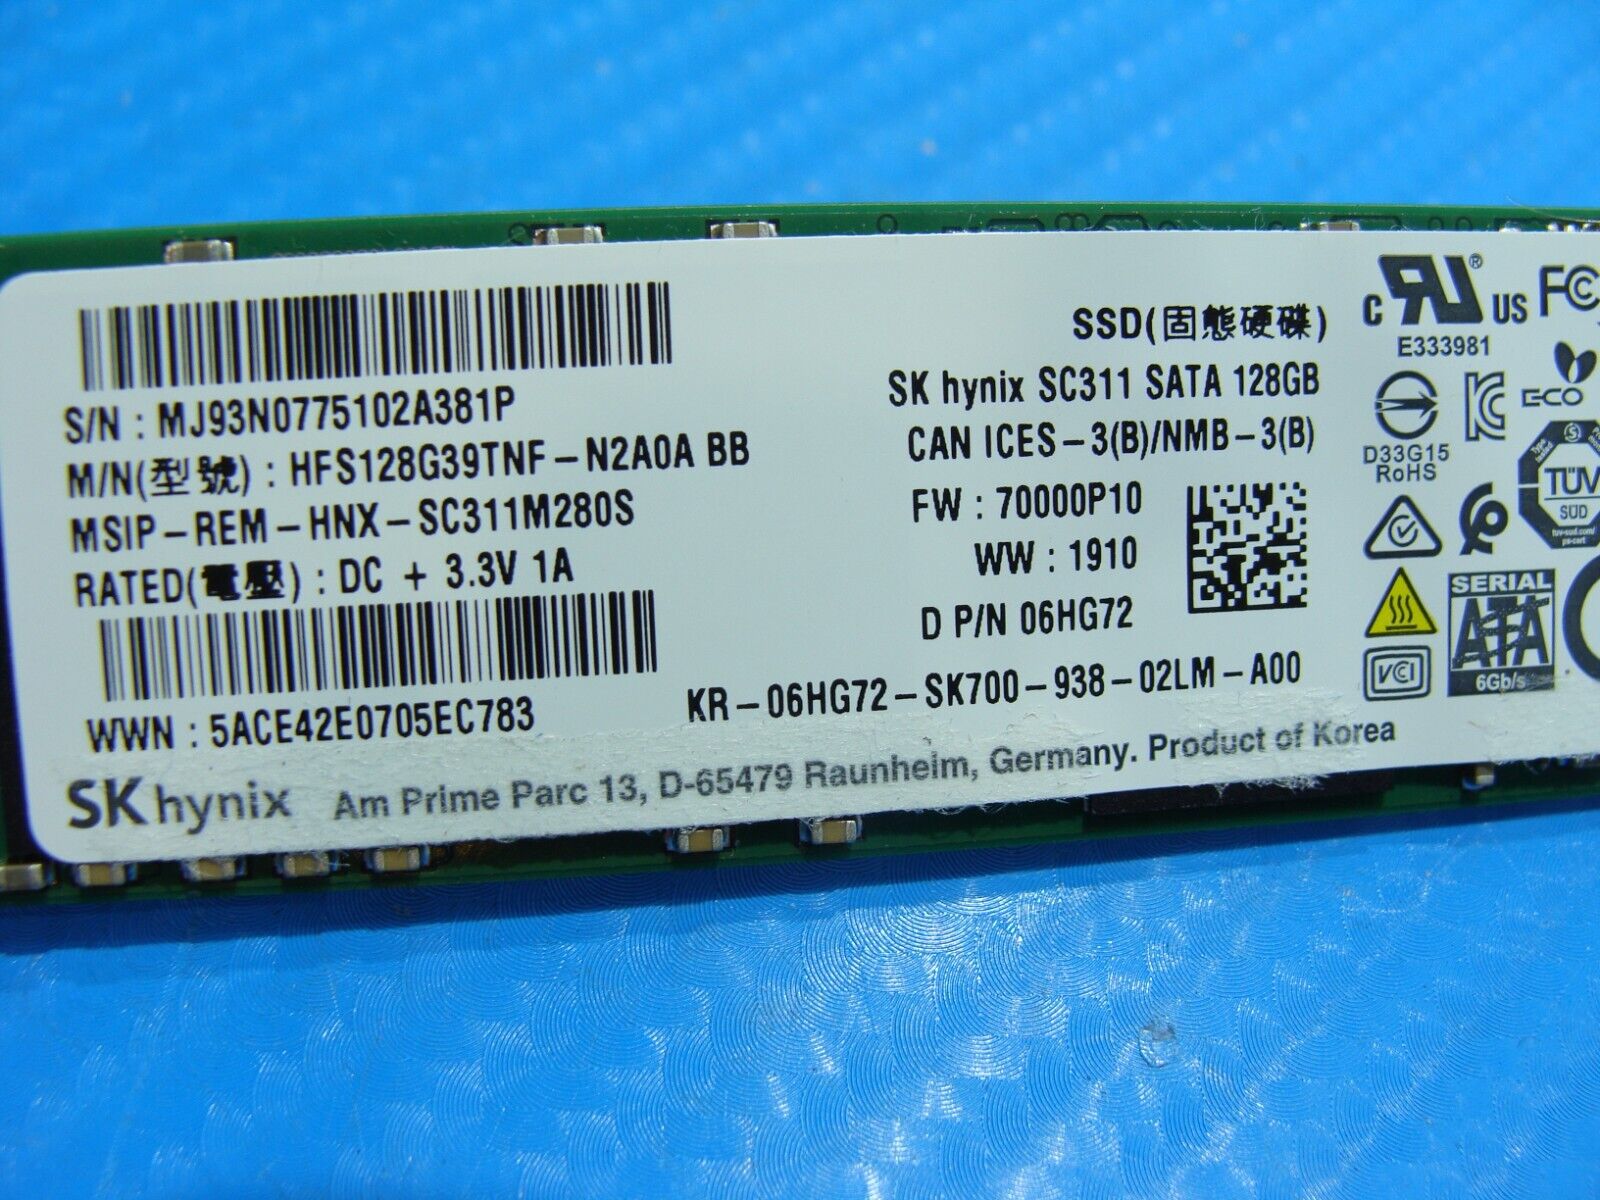 Dell 5491 SK Hynix 128GB SATA M.2 SSD Solid State Drive 6HG72 HFS128G39TNF-N2A0A